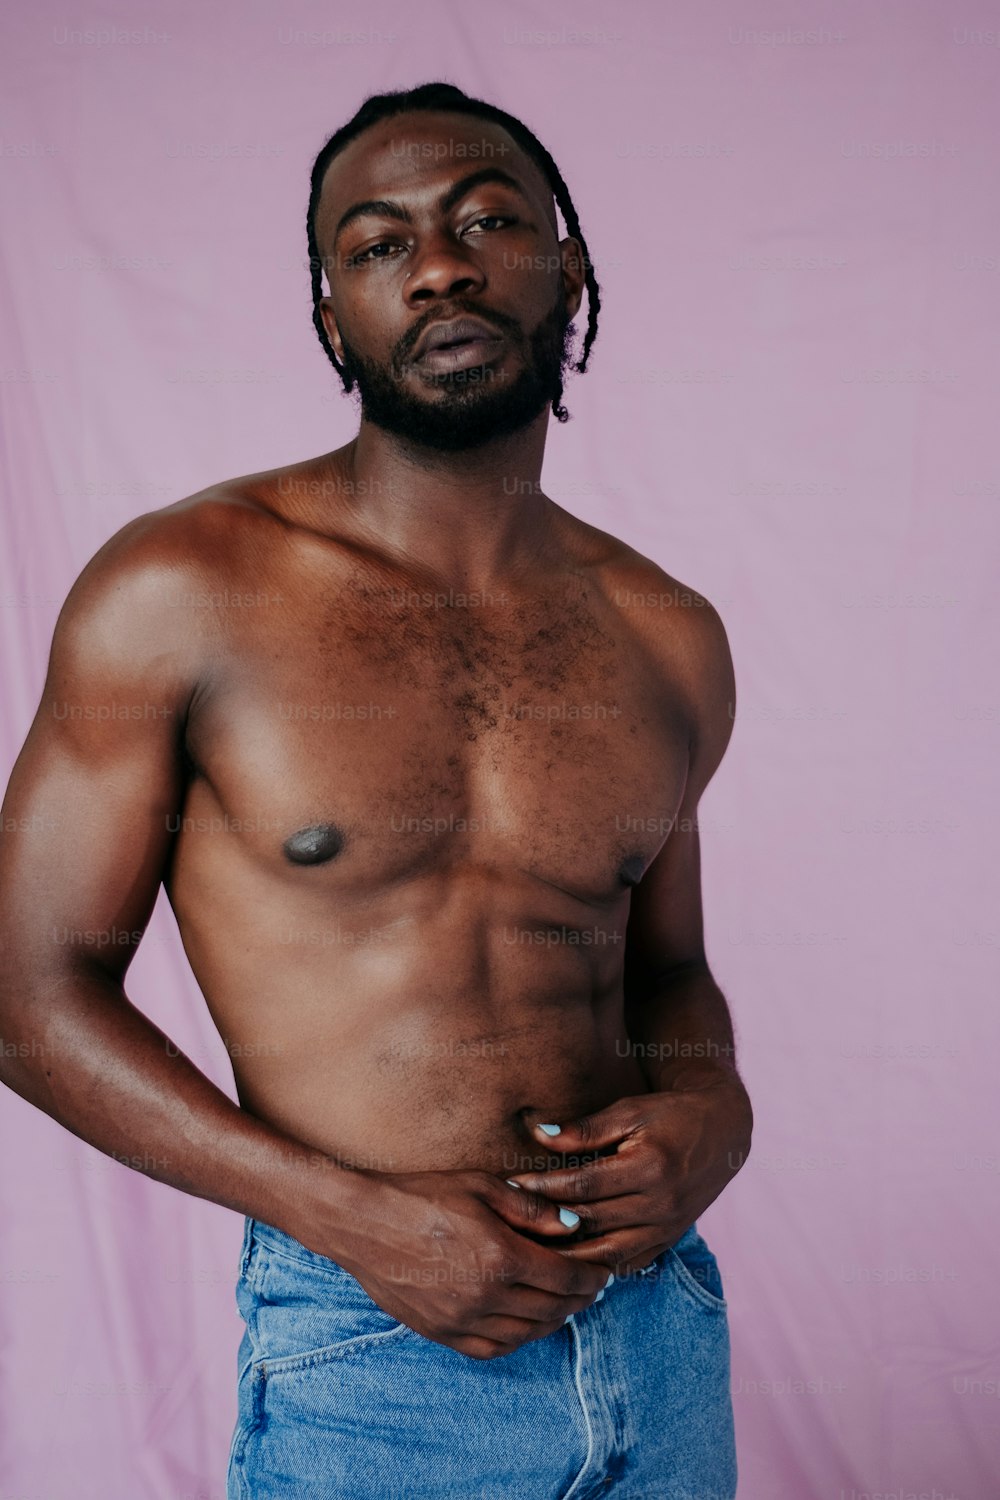 a man with no shirt standing in front of a pink background